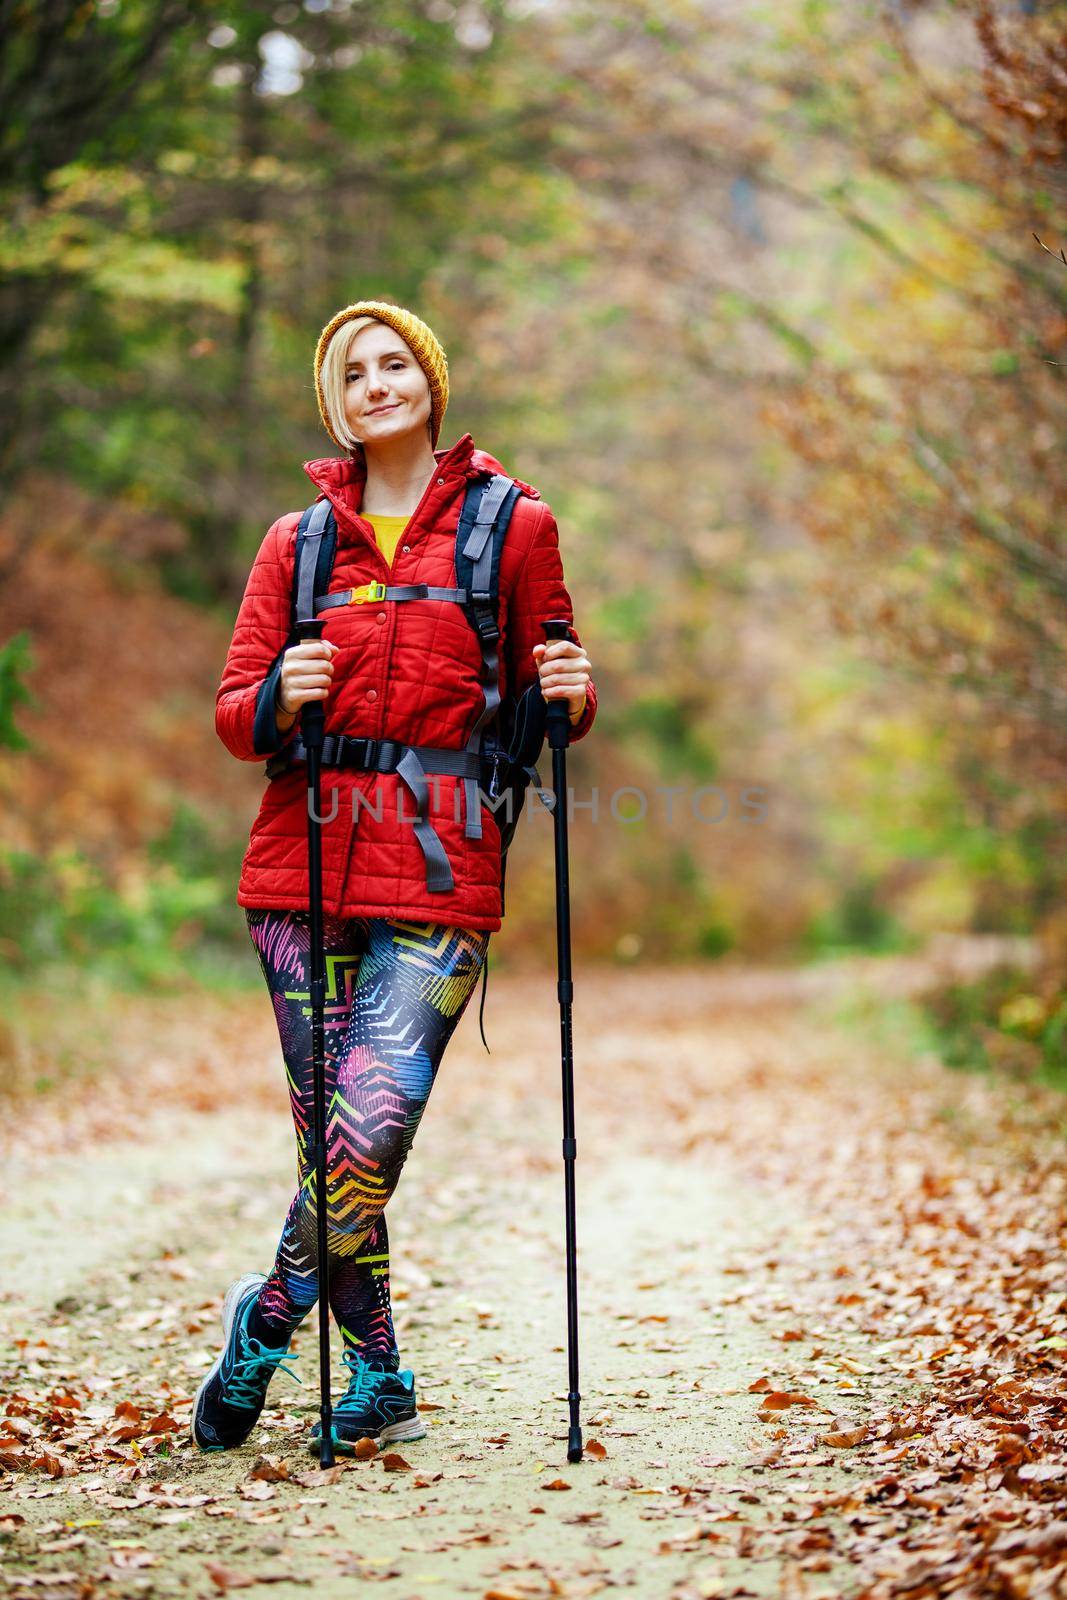 Hiking girl with poles and backpack standing on a trail. Looking at camera. Travel and healthy lifestyle outdoors in fall season